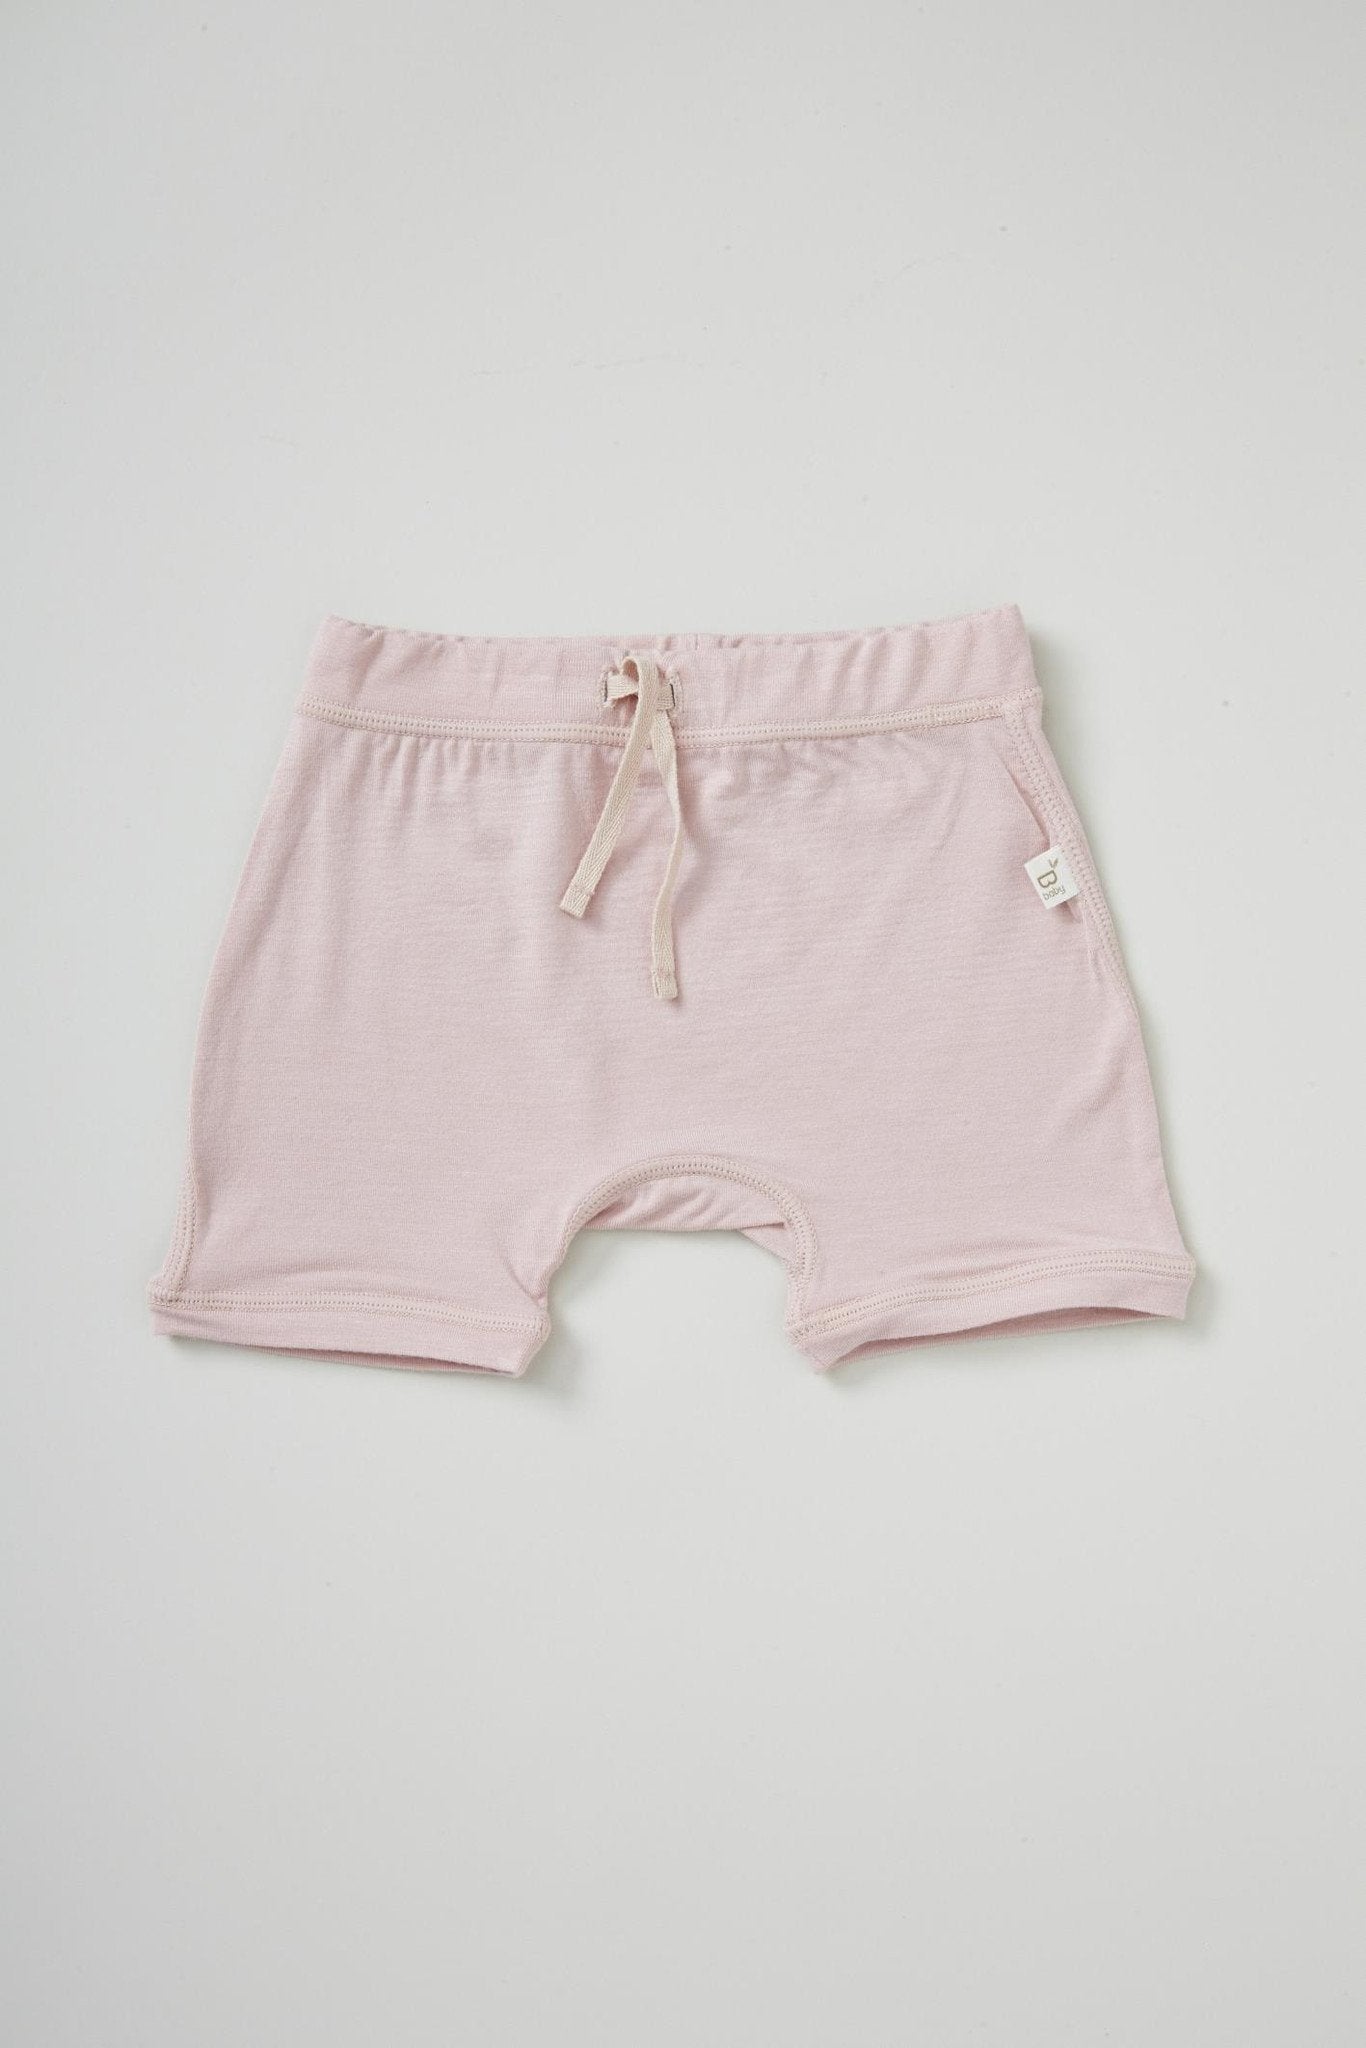 Baby Pull on Shorts Pink - Organic Bamboo Eco Wear